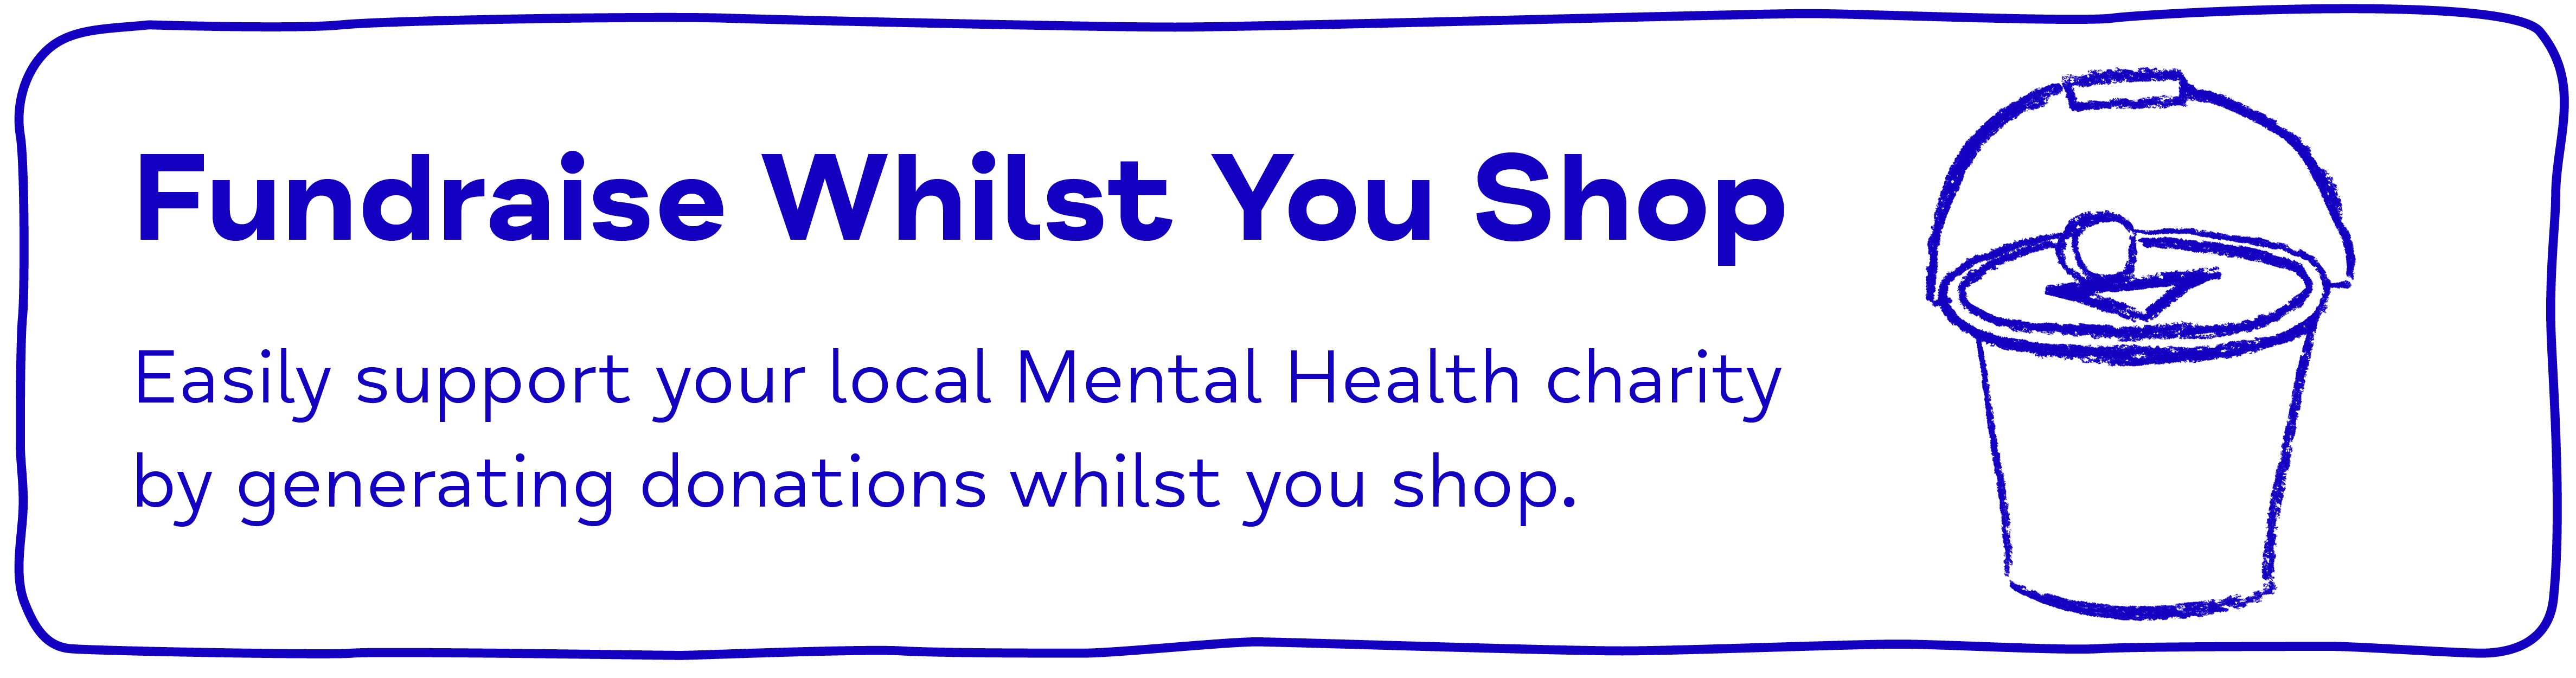 Fundraise Whilst You Shop Easily support your local Mental Health charity   by generating donations whilst you shop.